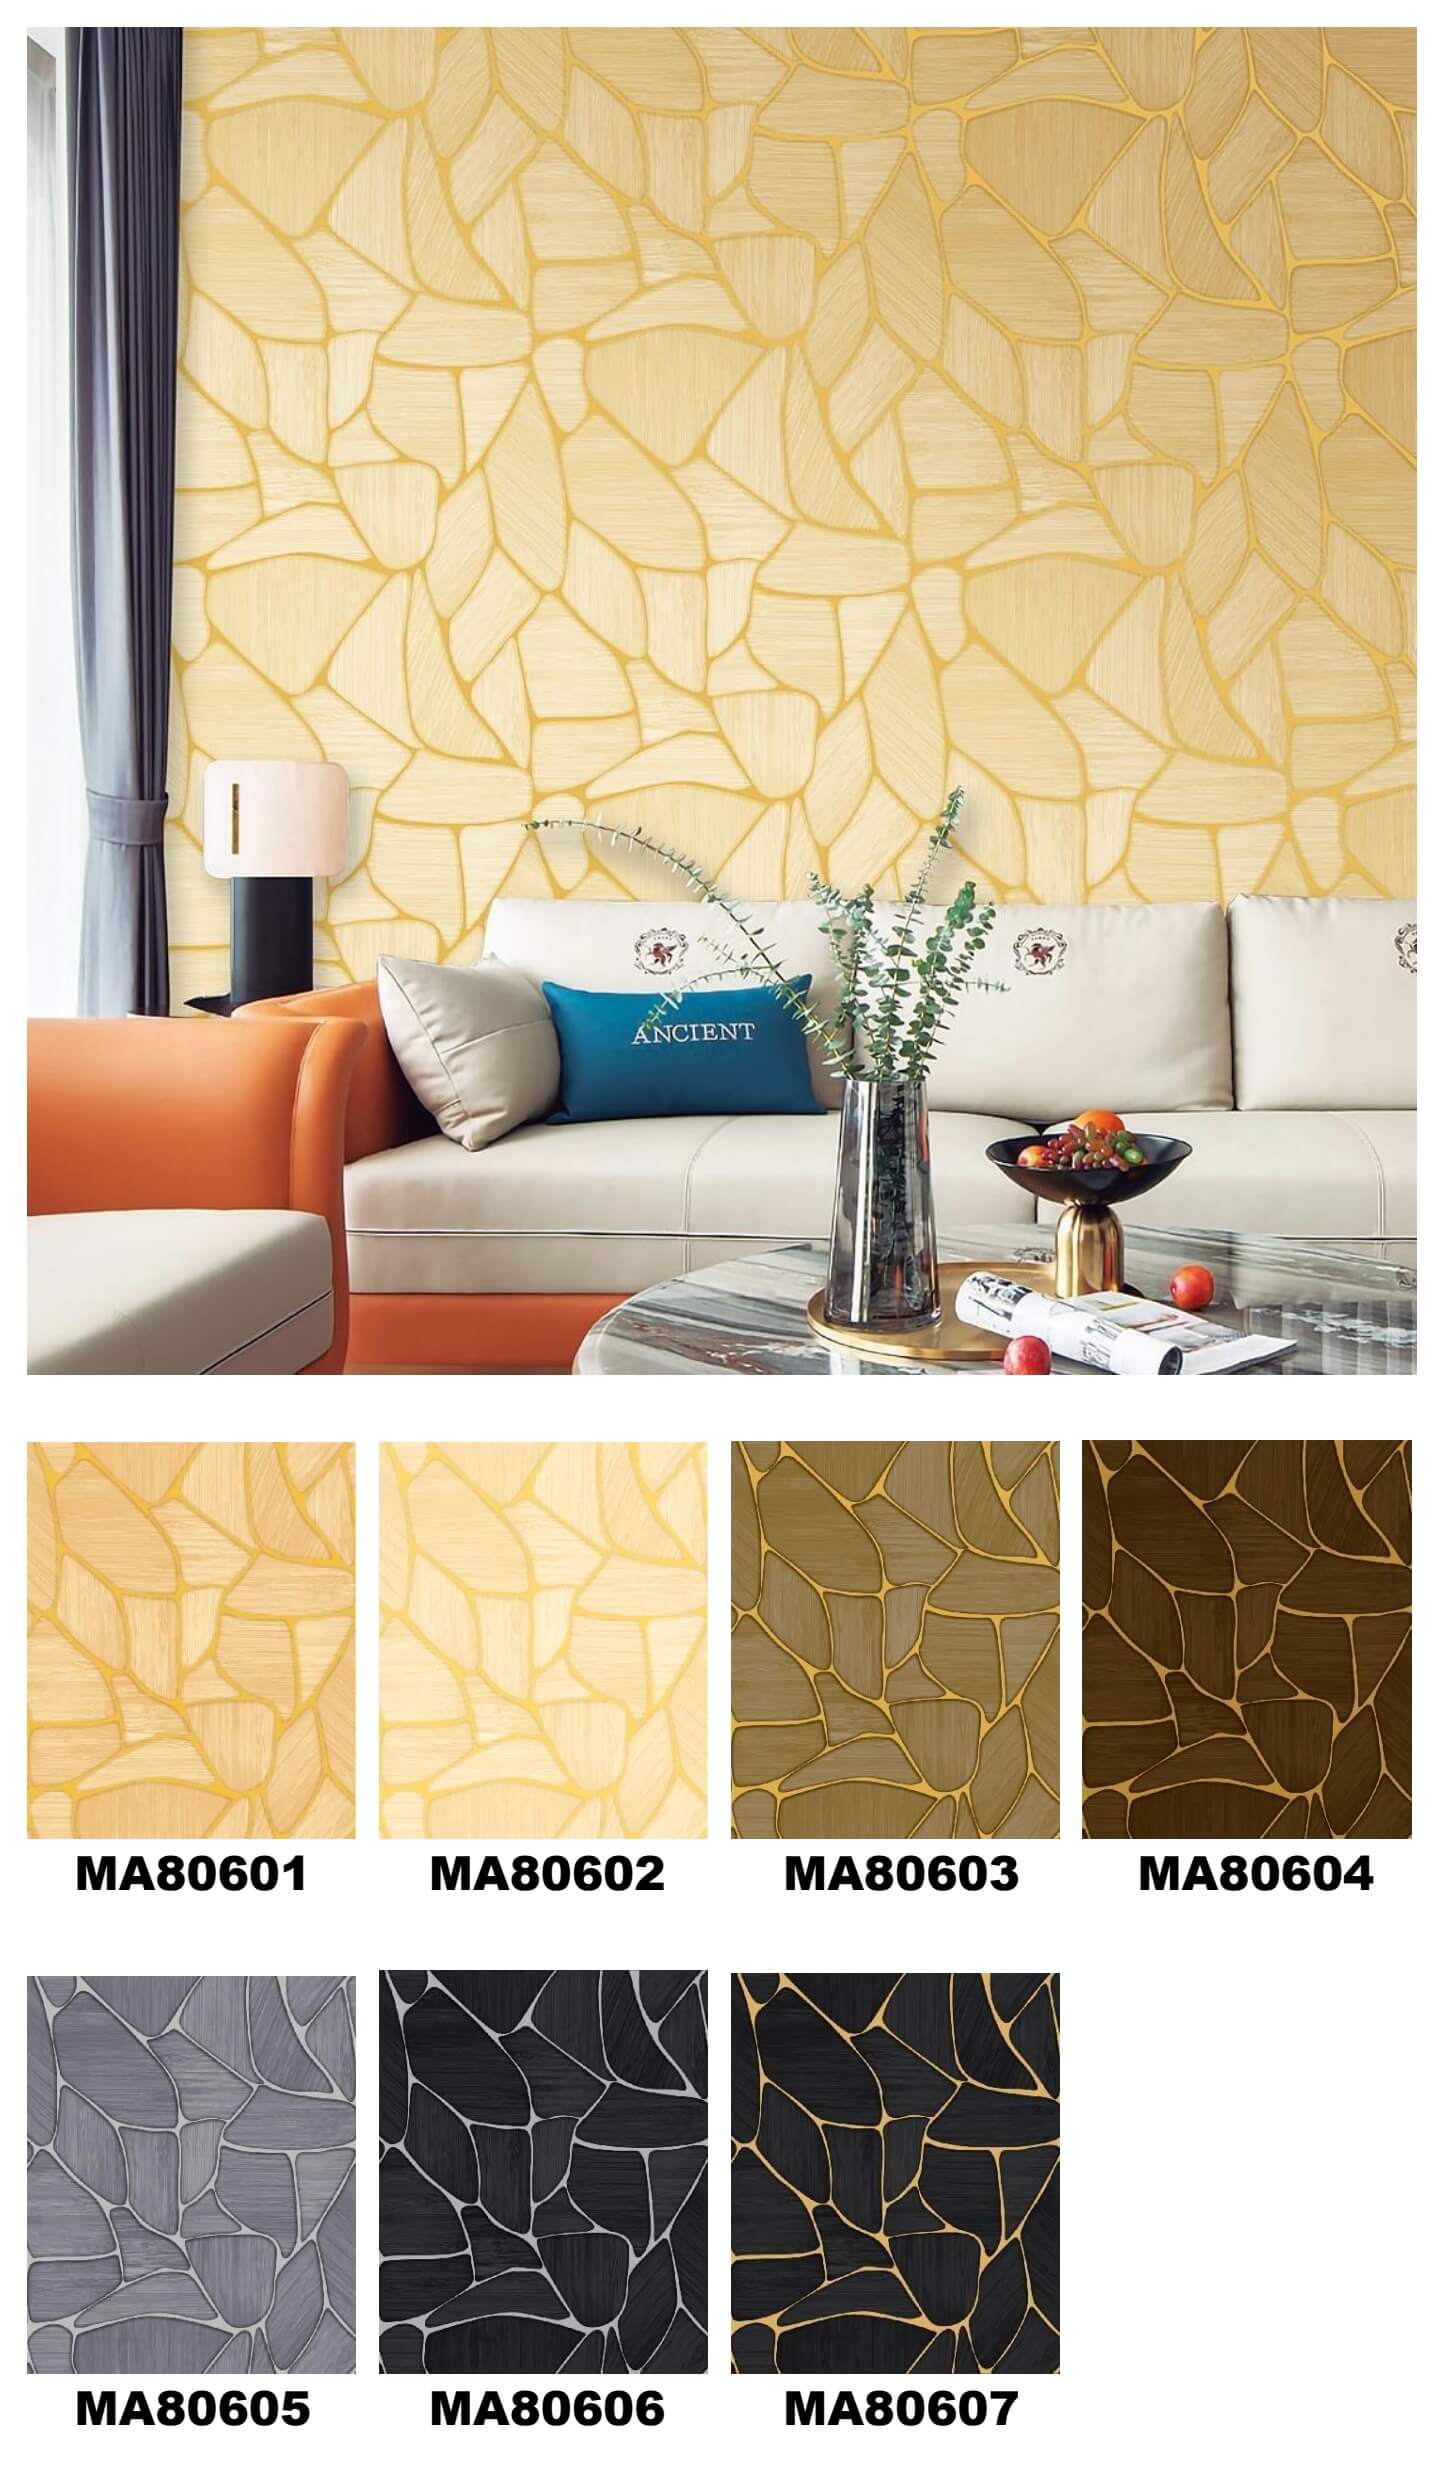 Beautiful Color 3D Design Wallpaper Better choice For Living Area, Bedroom, kids room, Office Durable PVC Wallpapers (17)